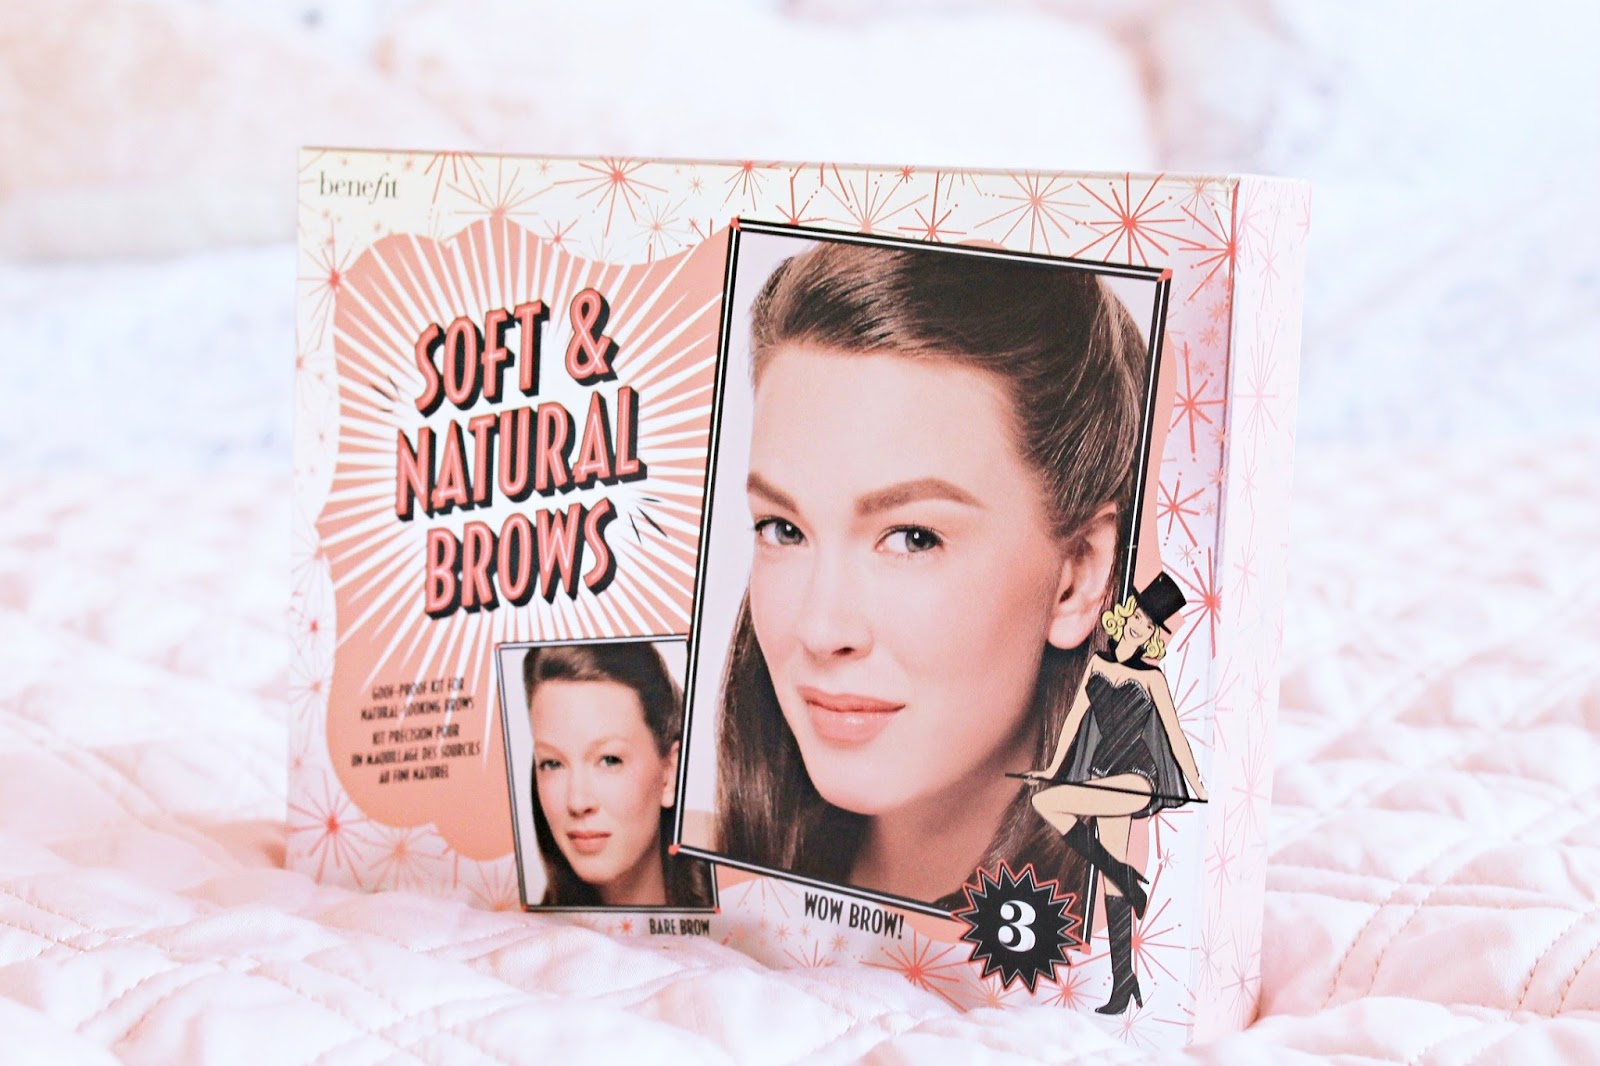 Benefit Cosmetics Soft and Natural brows kit review and swatches